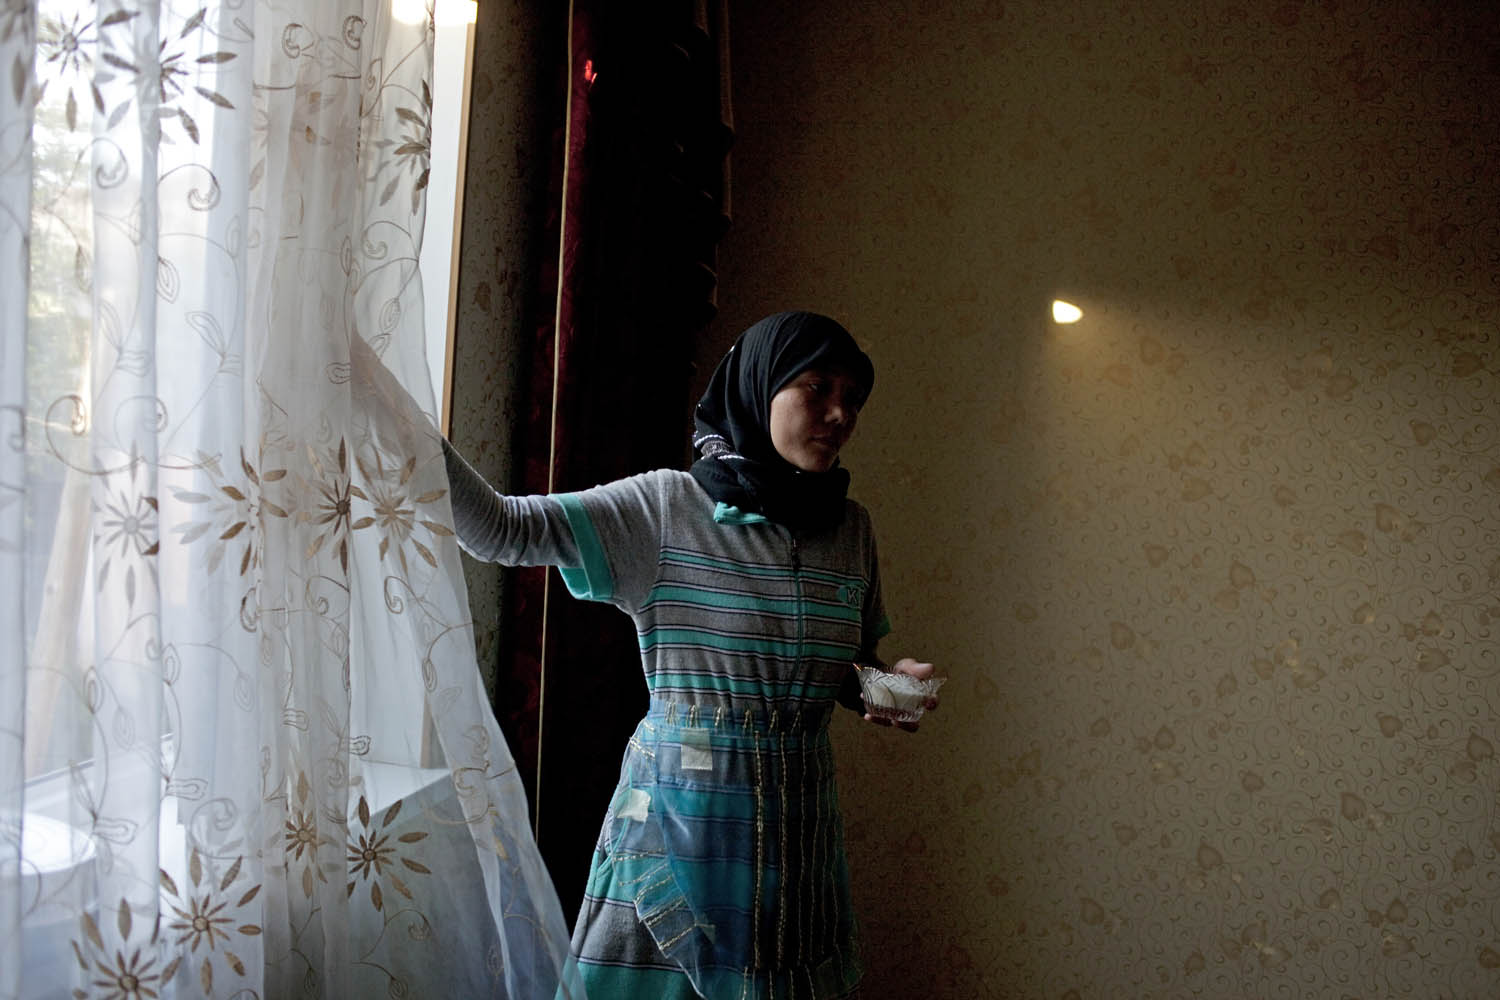 A Uighur woman in the Druzhba neighborhood of Almaty takes a sugar bowl from the window sill to serve guests tea.